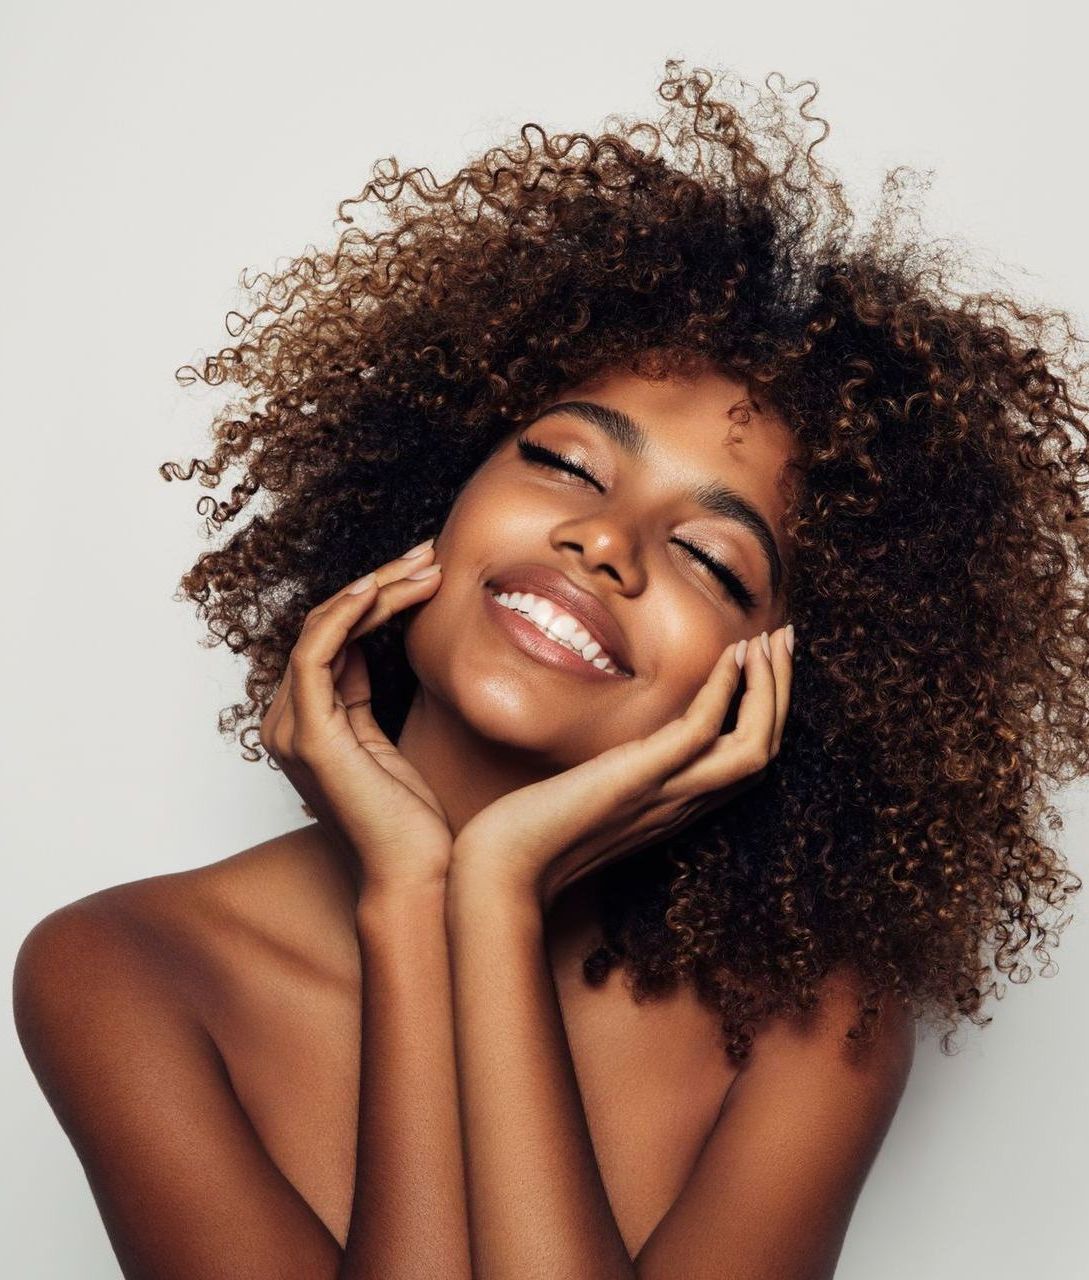 Happy Woman with Curly Hair-Savannah, GA-The Smile and Face Company